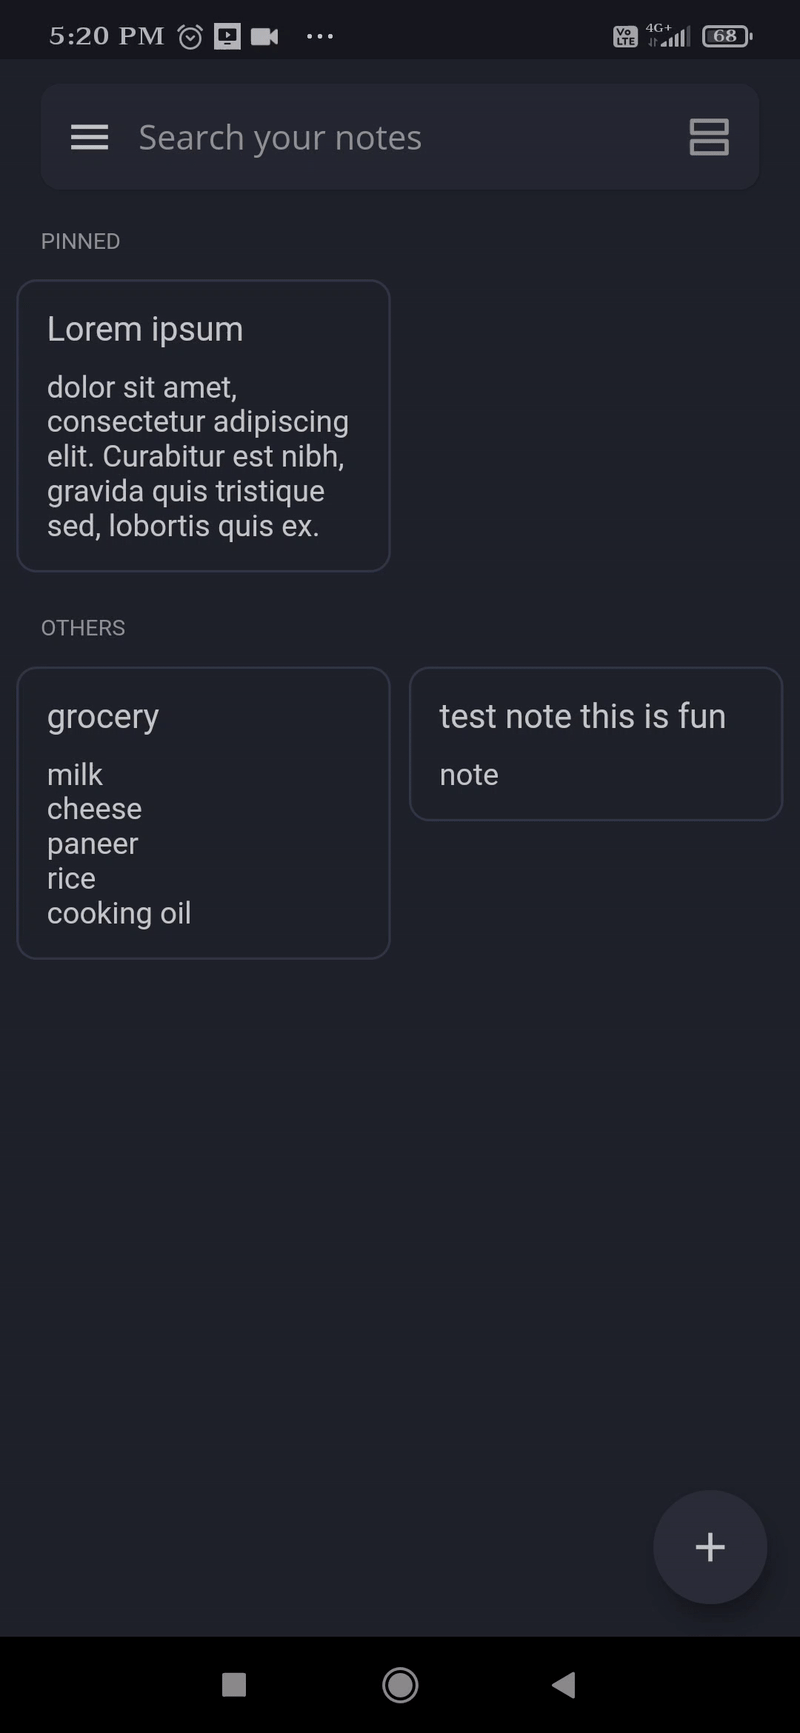 Search-note-gif.gif